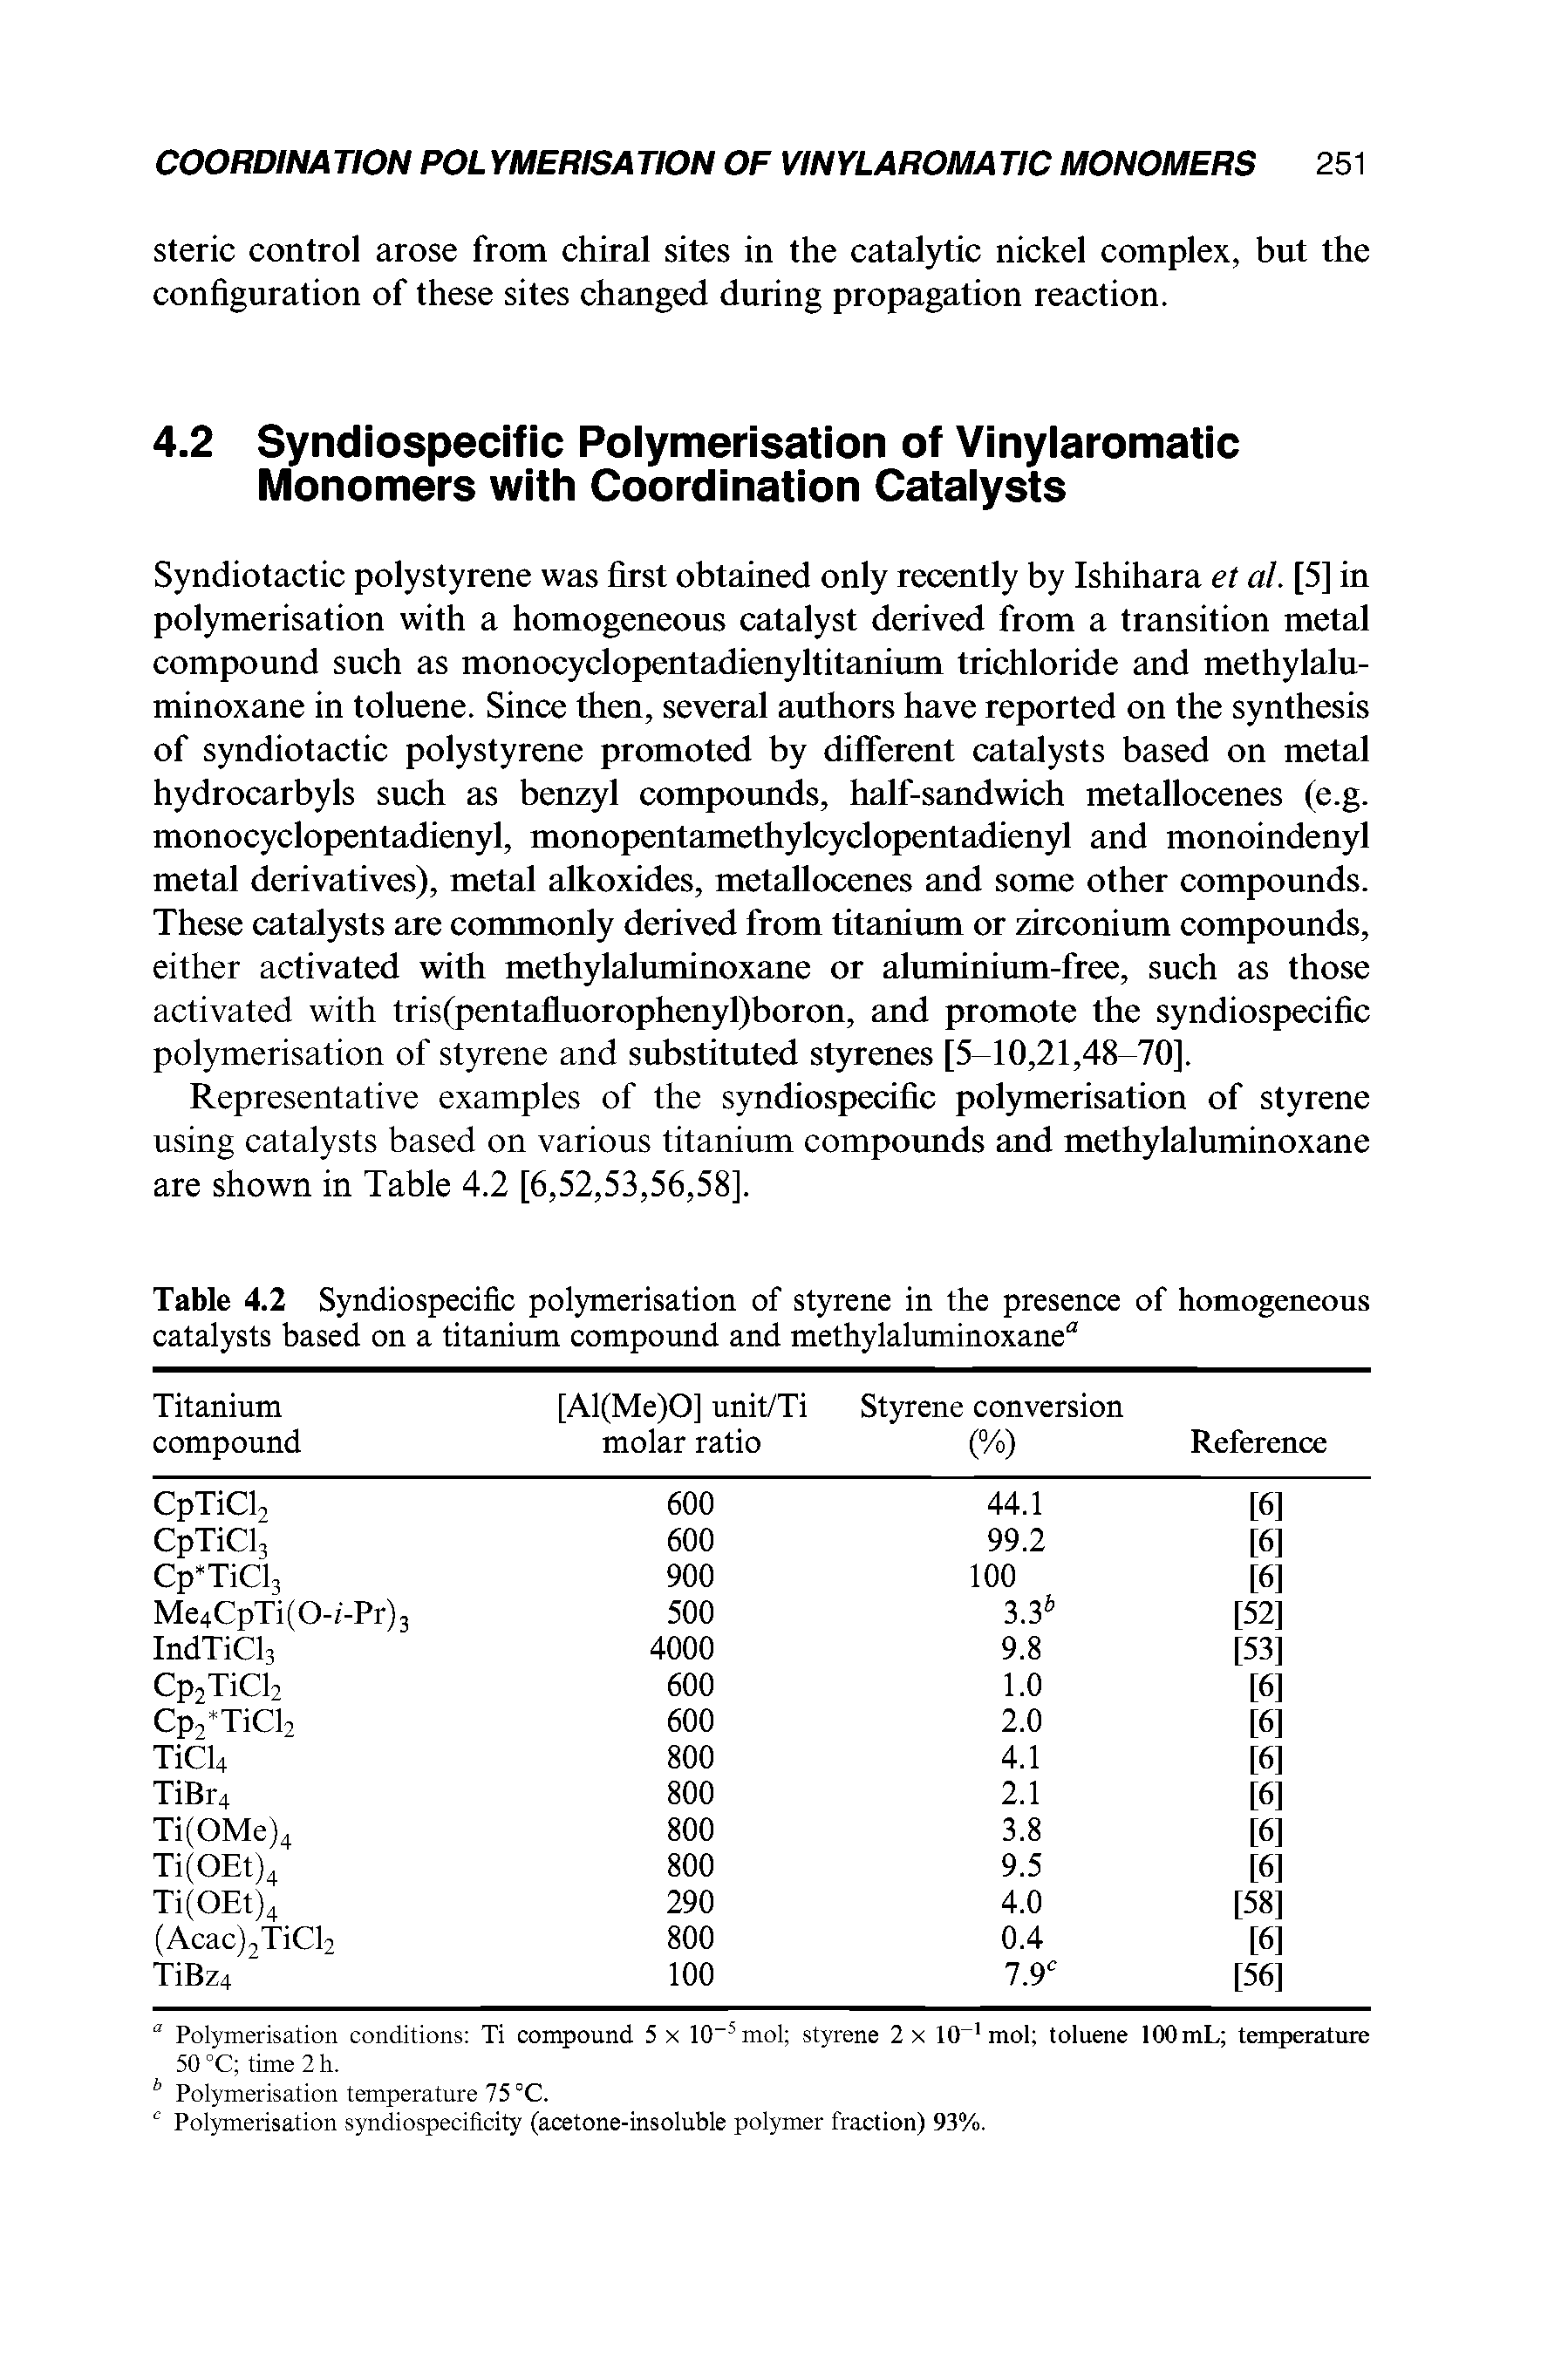 Table 4.2 Syndiospecific polymerisation of styrene in the presence of homogeneous catalysts based on a titanium compound and methylaluminoxane0...